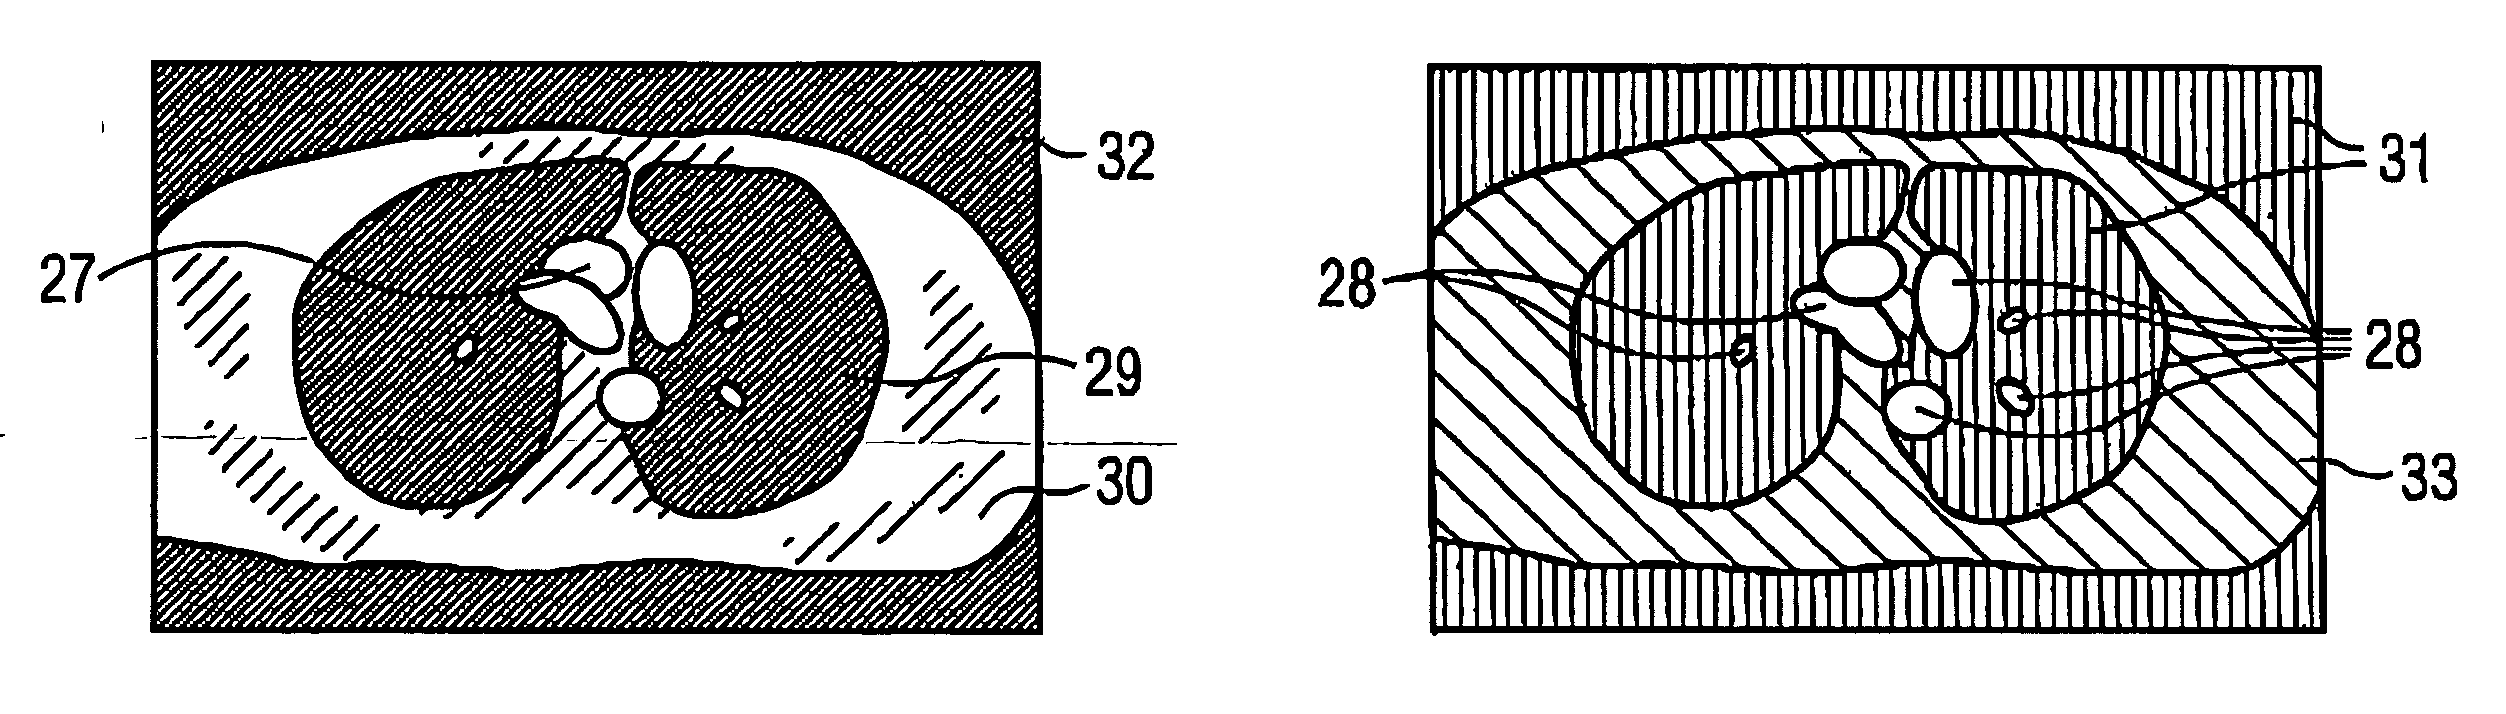 Method and magnetic resonance tomography apparatus for producing phase-coded flow images